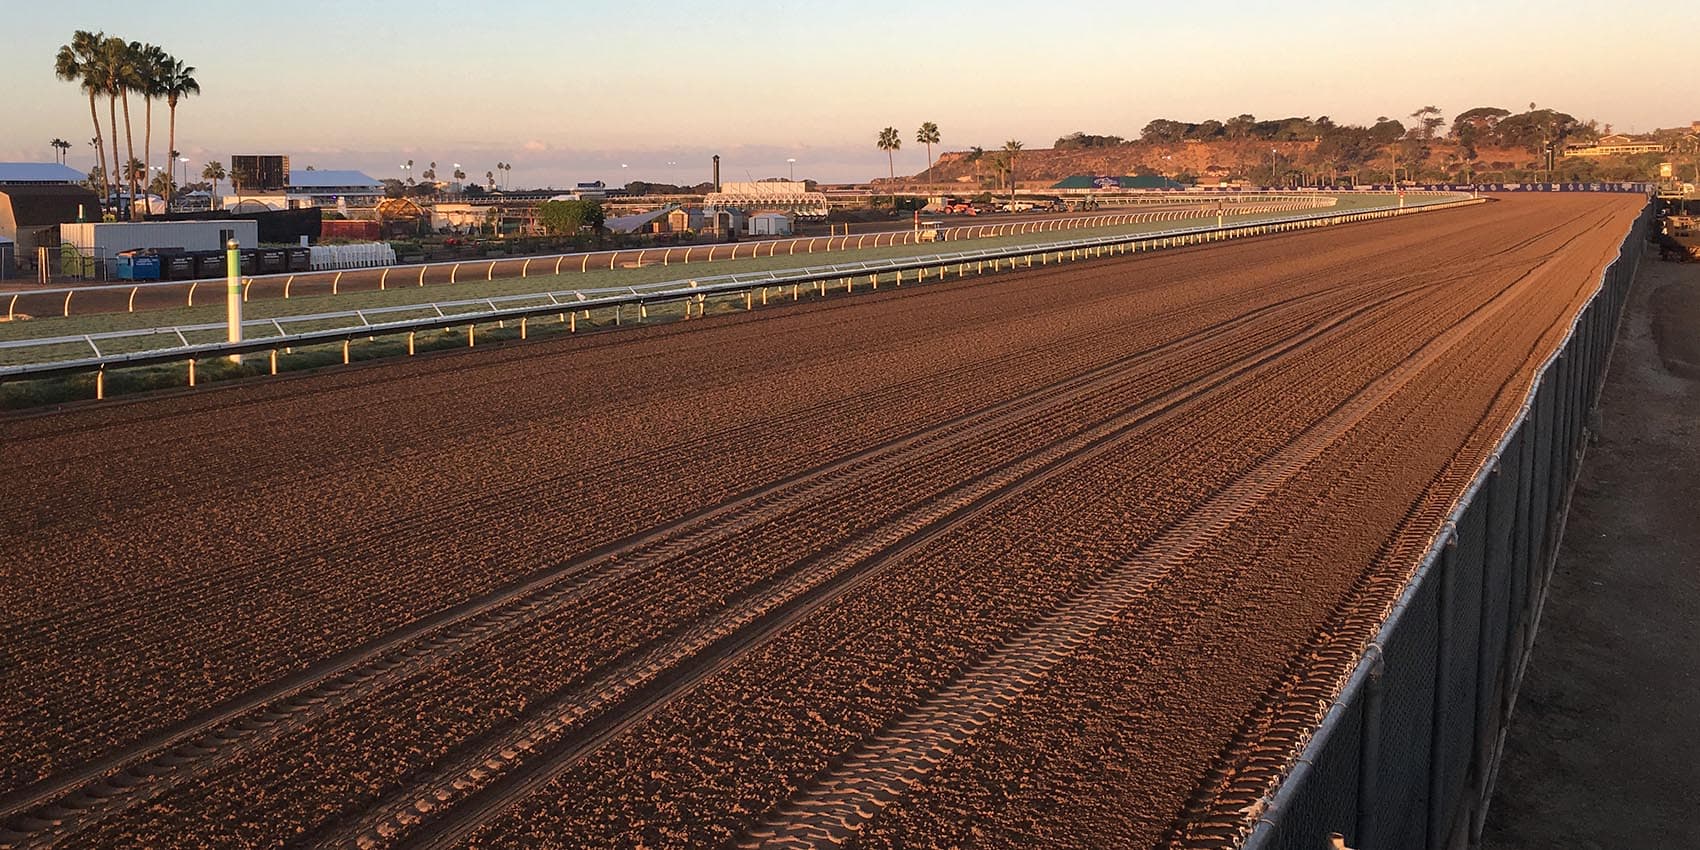 The Del Mar racetrack in Del Mar, Calif., where the 34th Breeders' Cup was held. (Alex Ashlock/Here & Now)